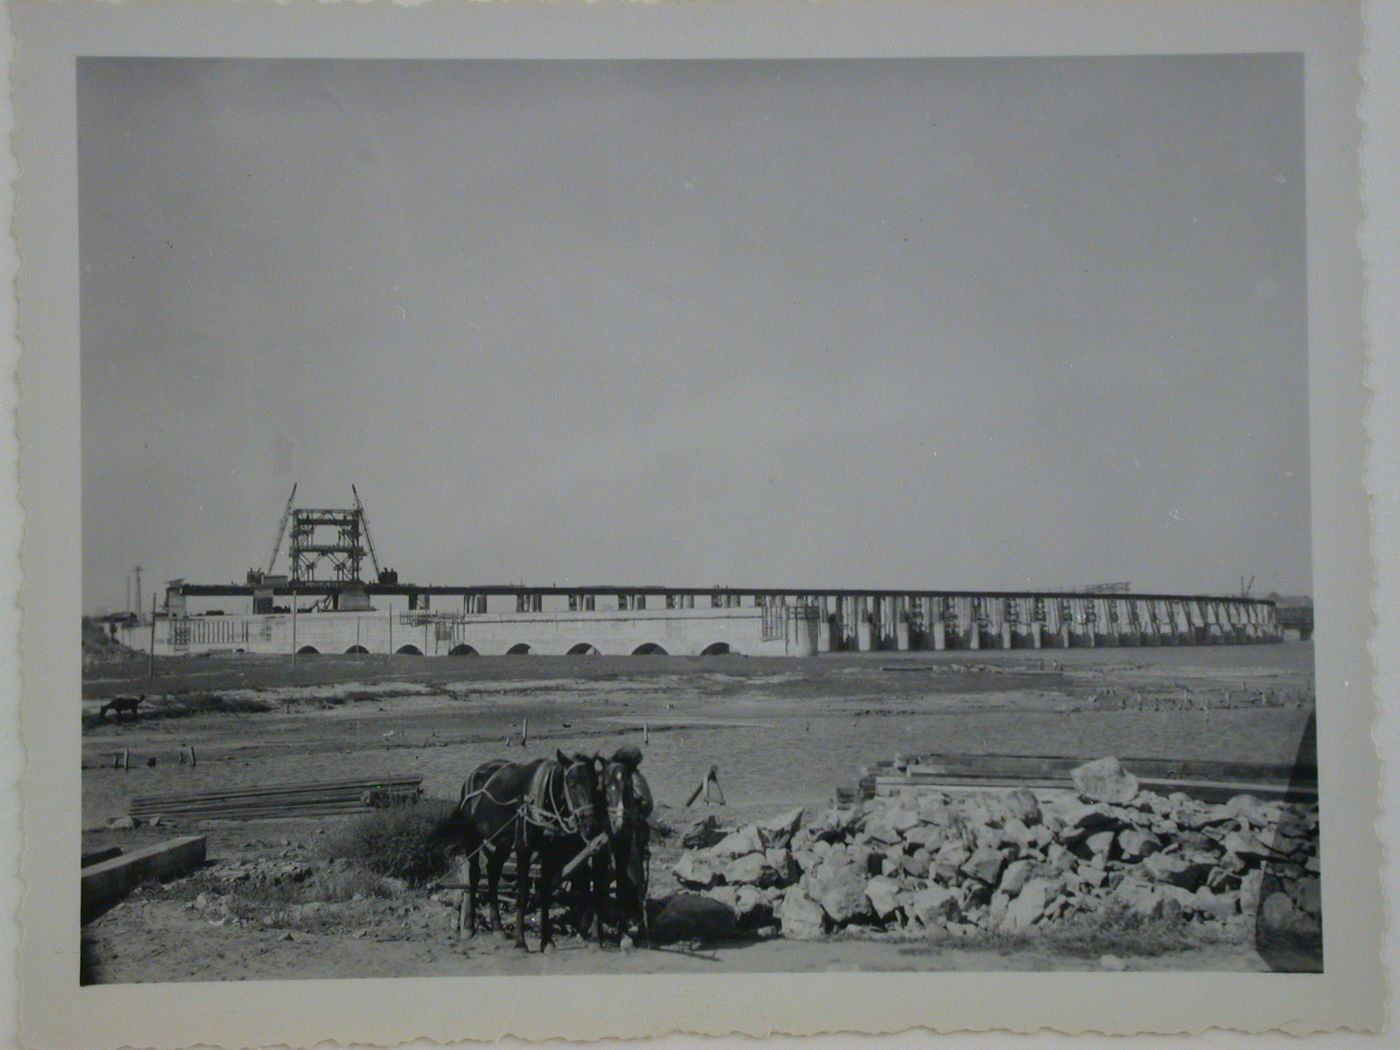 View of Dnieper Hydroelectric Power Station under construction, Zaporozhe, Soviet Union (now in Ukraine)